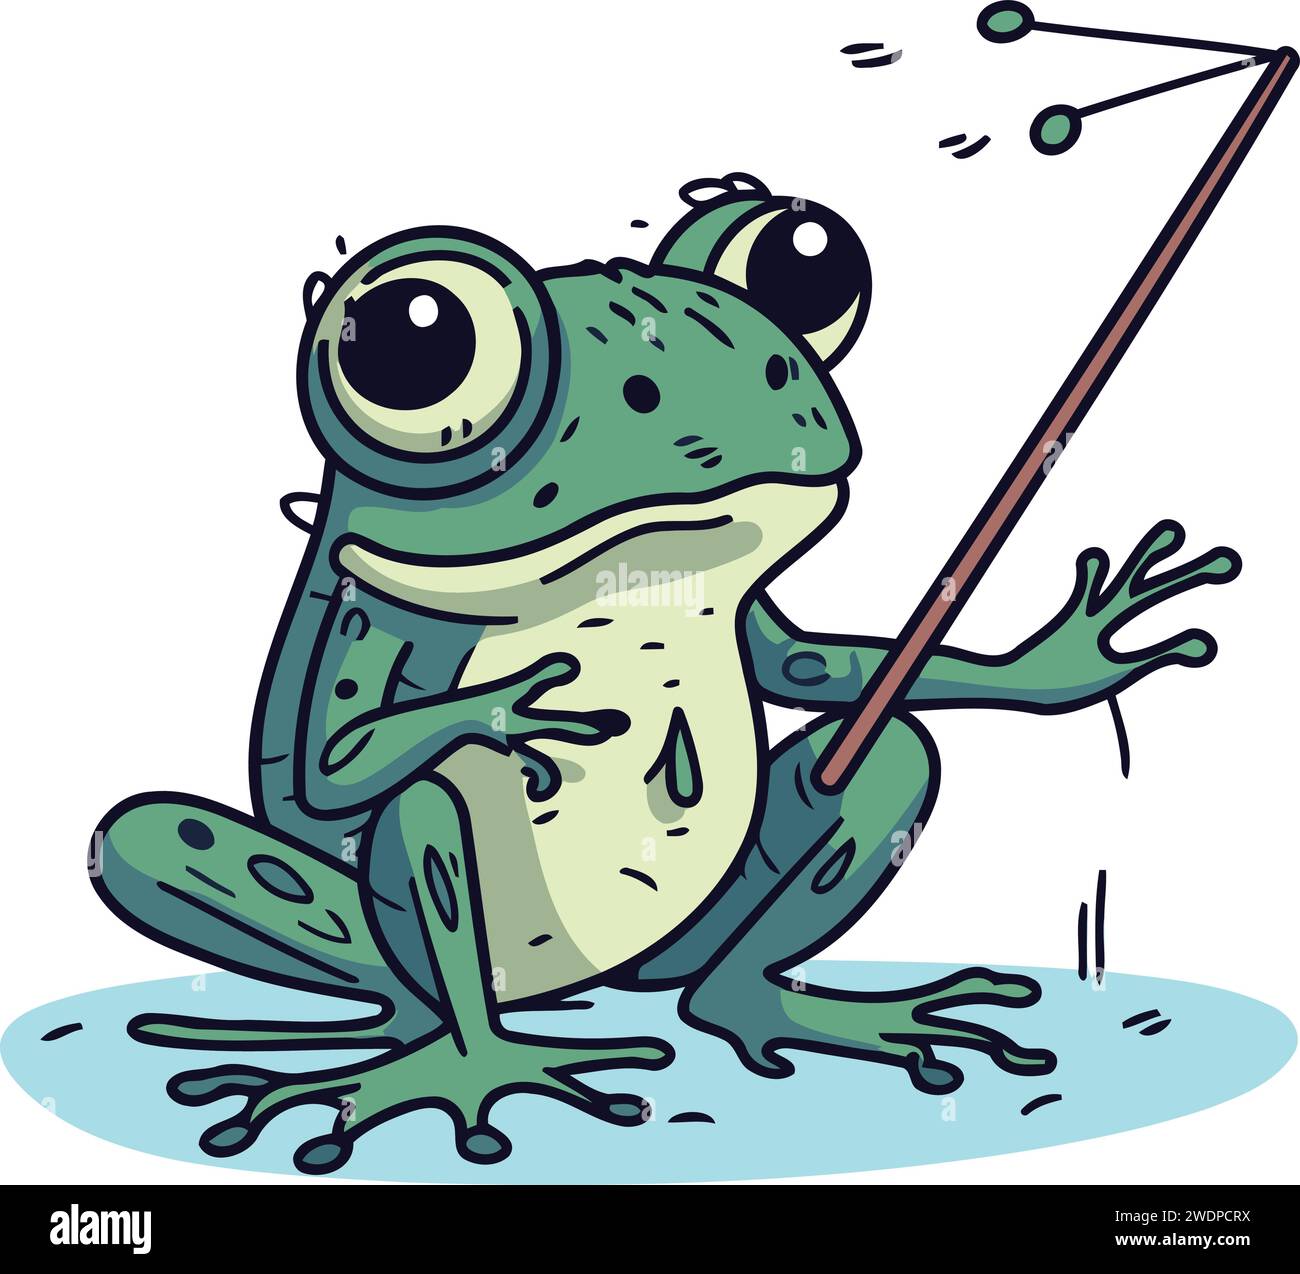 https://c8.alamy.com/comp/2WDPCRX/frog-with-fishing-rod-vector-illustration-of-a-cartoon-frog-2WDPCRX.jpg